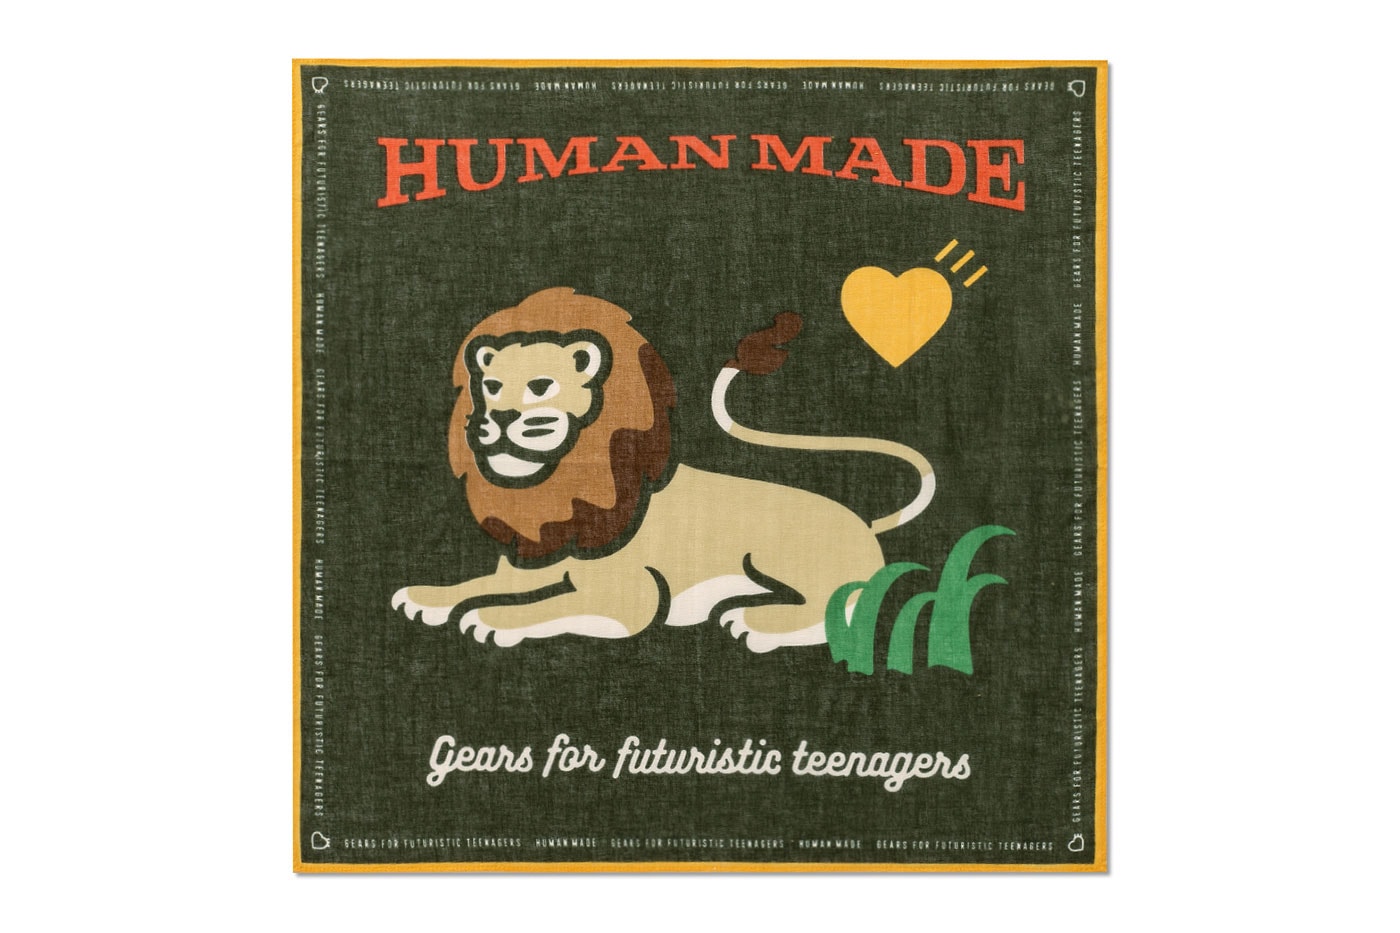 HUMAN MADE x HBX Lion Capsule Collection Hong Kong Pop-Up Release Info Buy Price